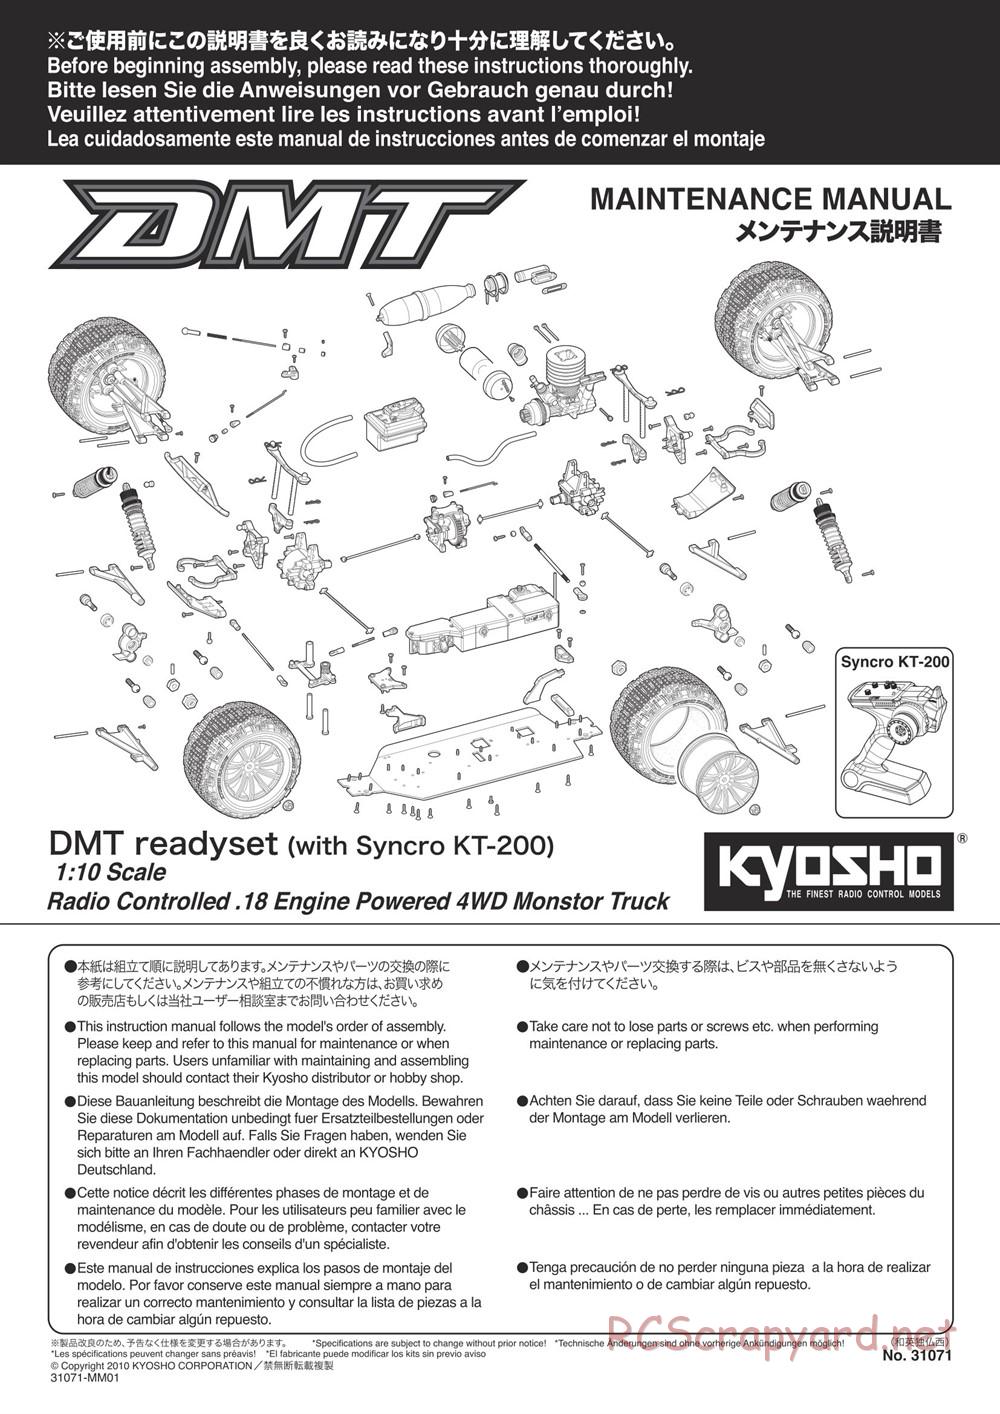 Kyosho - DMT - Manual - Page 1